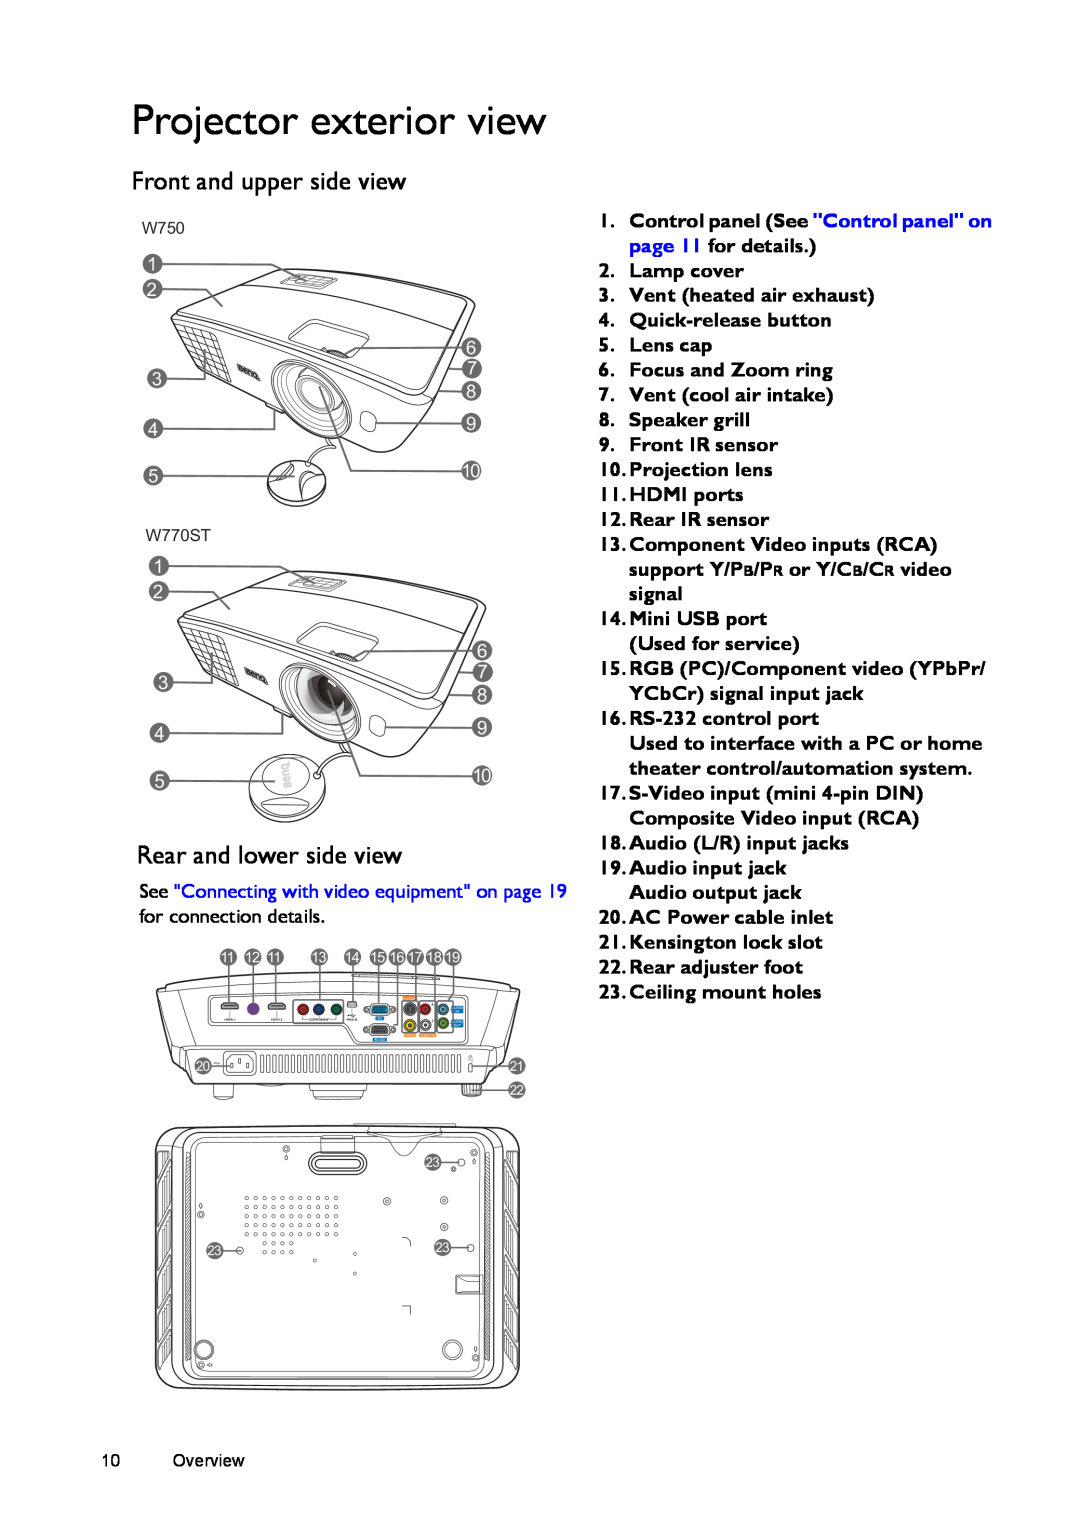 BenQ W770ST user manual Projector exterior view, Front and upper side view, Rear and lower side view 